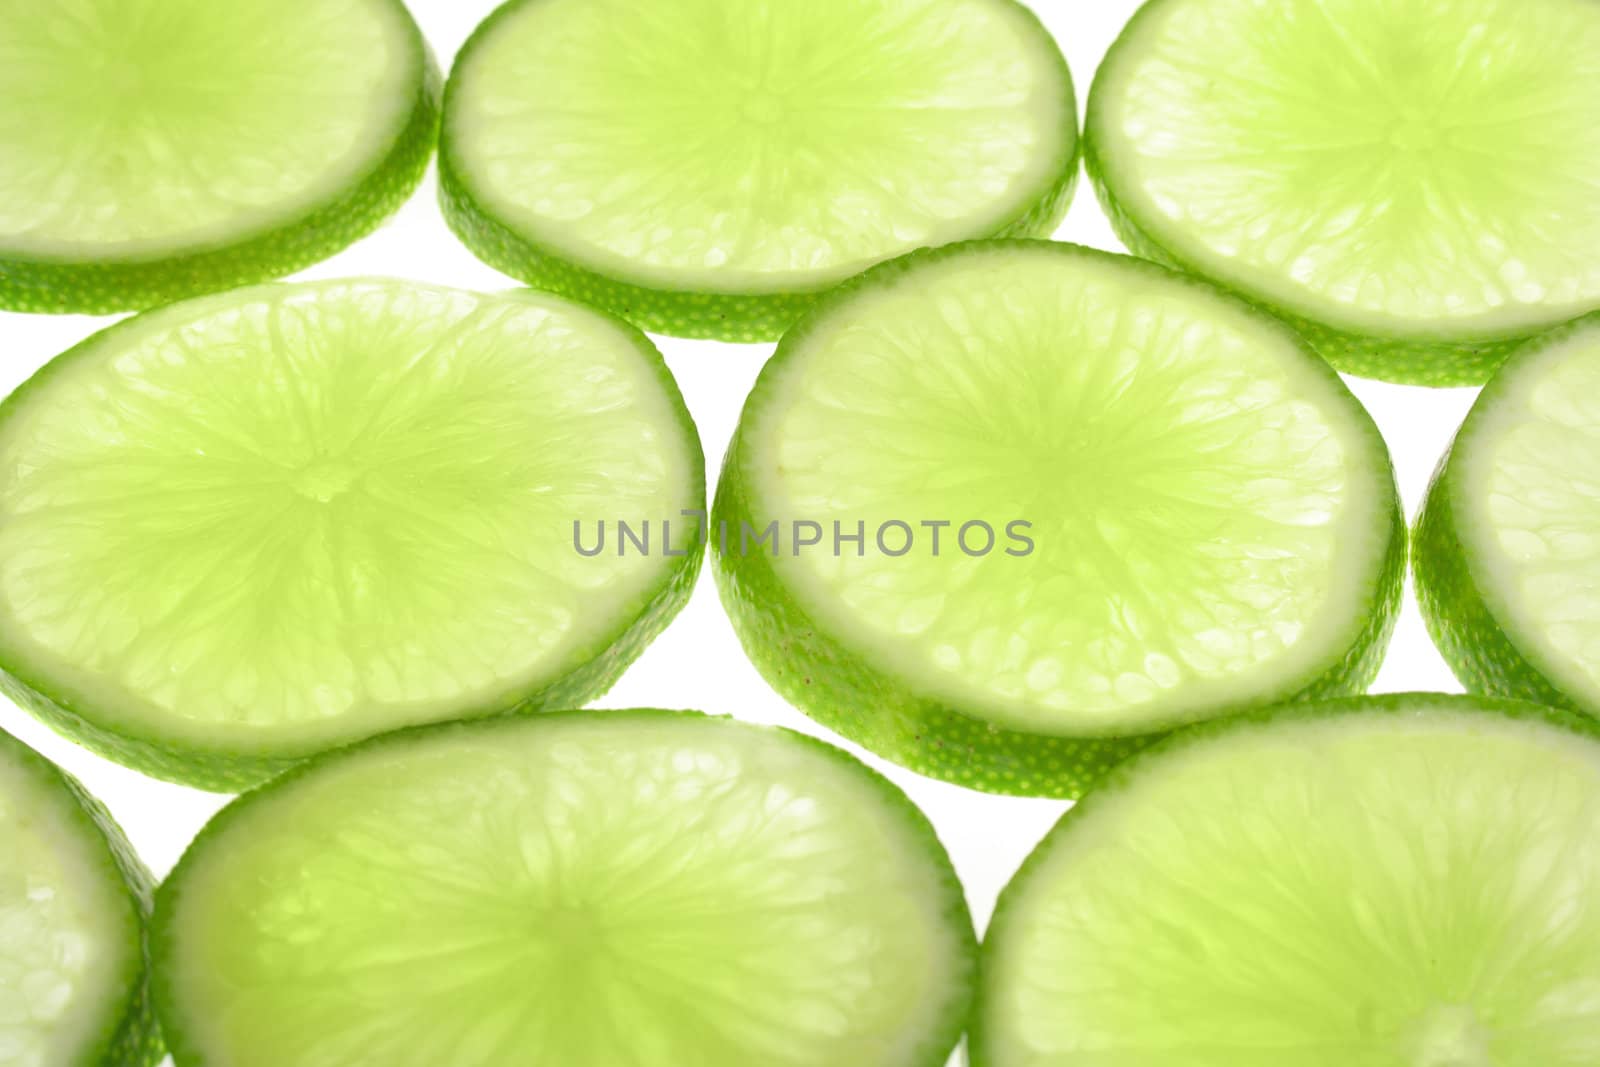 Lime, abstract background from slices